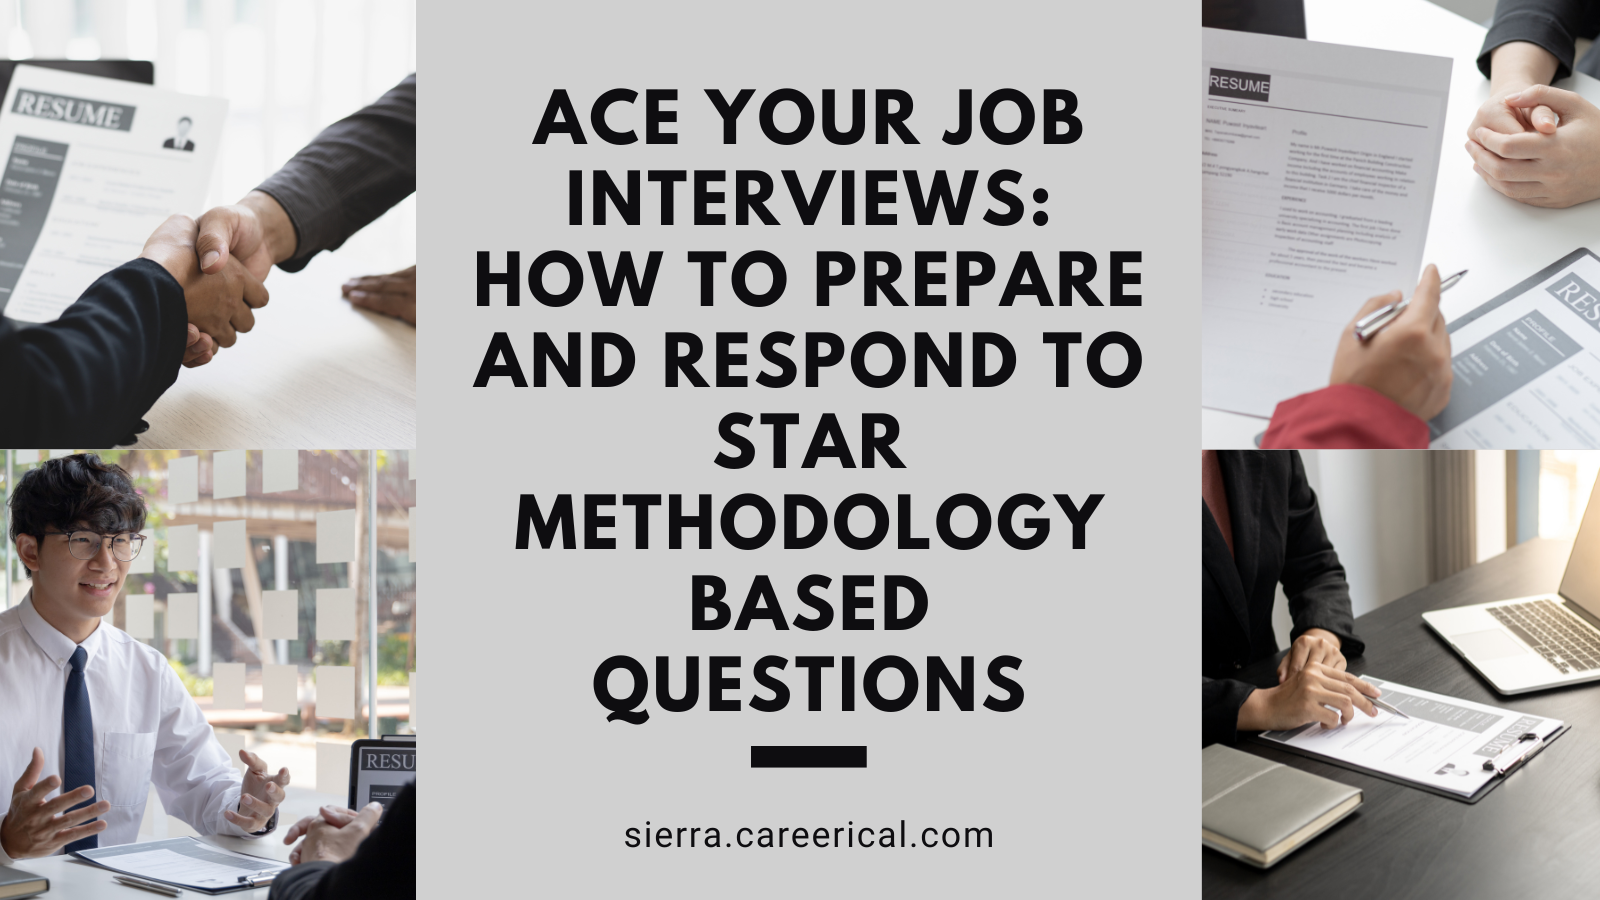 Ace Your Job Interviews How to Prepare and Respond to STAR Methodology Based Questions